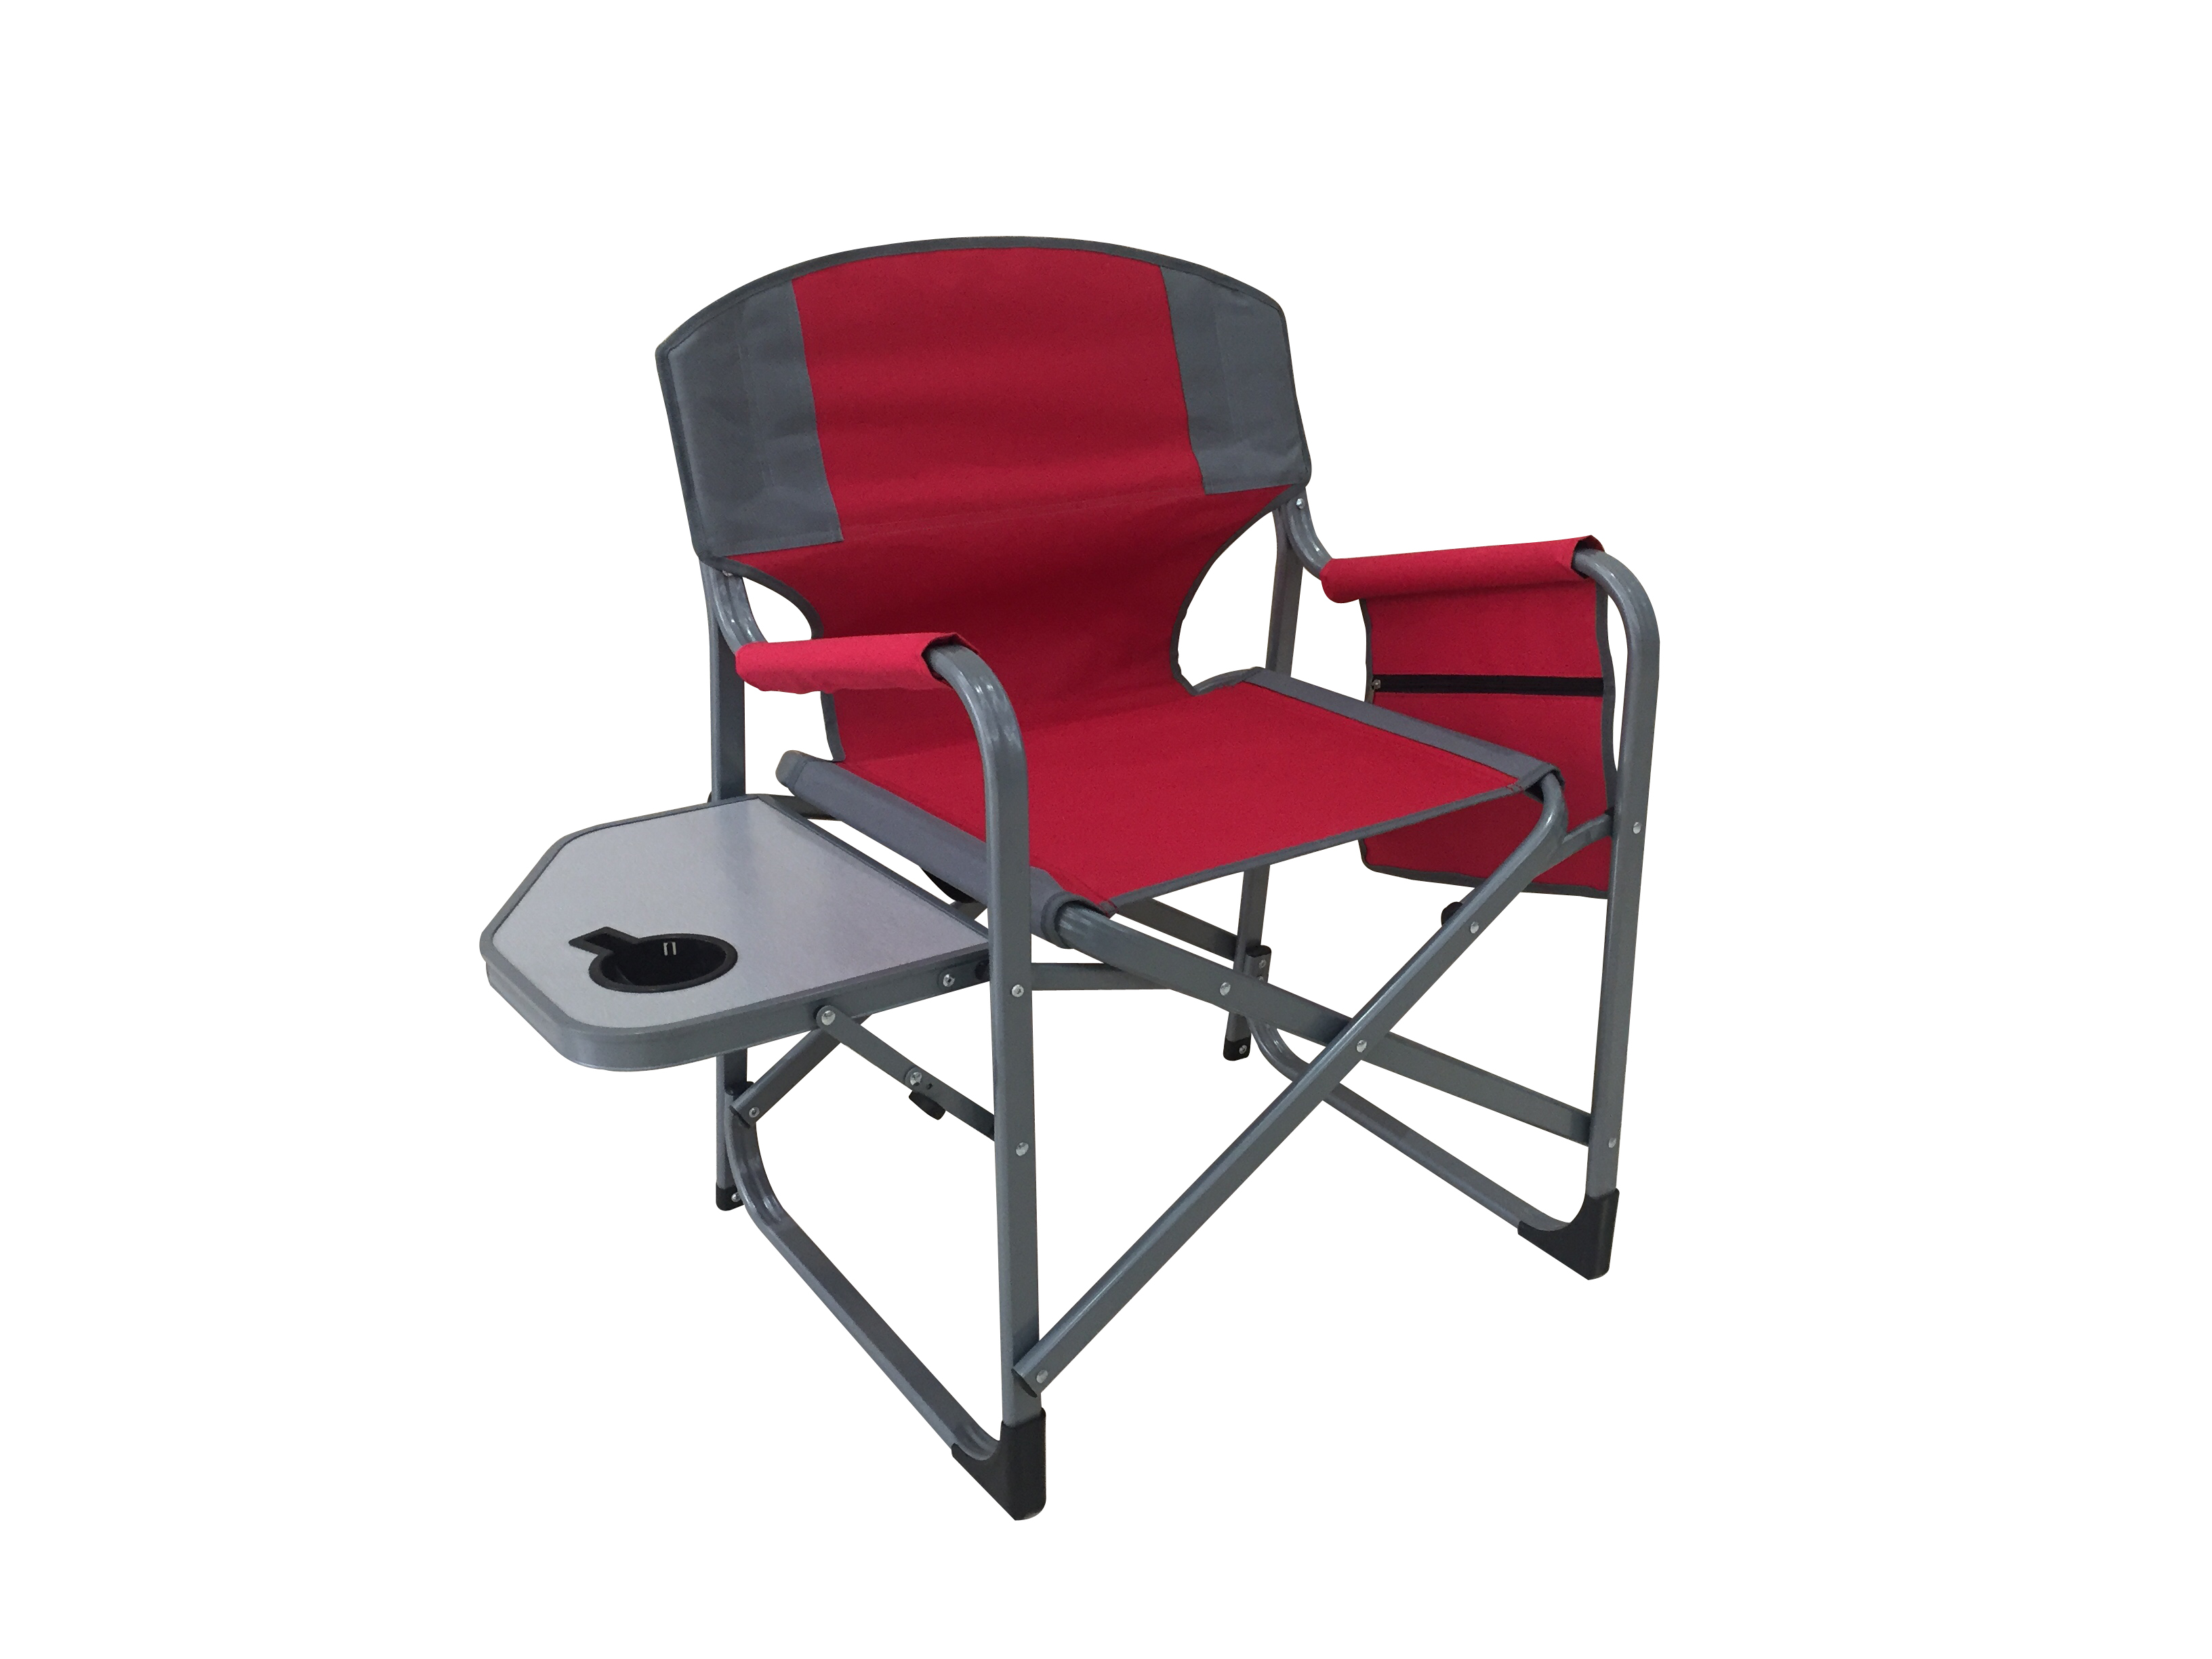 CAMP & GO EVEREST CAMPING CHAIR RED/GREY